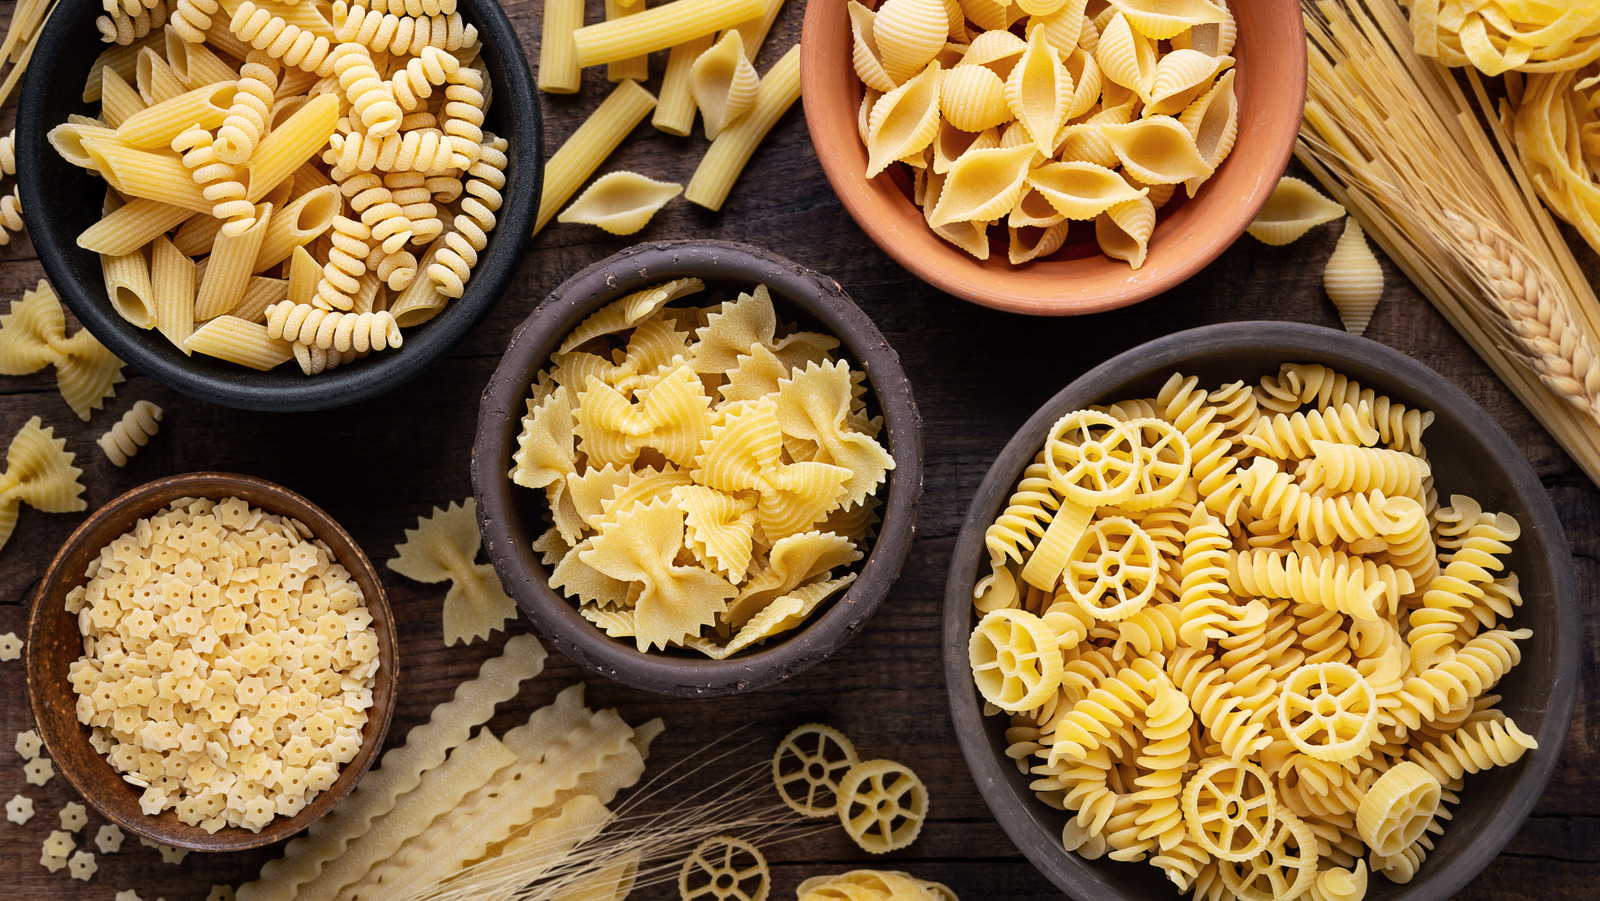 Which pasta shape is twisted and spiral-shaped?